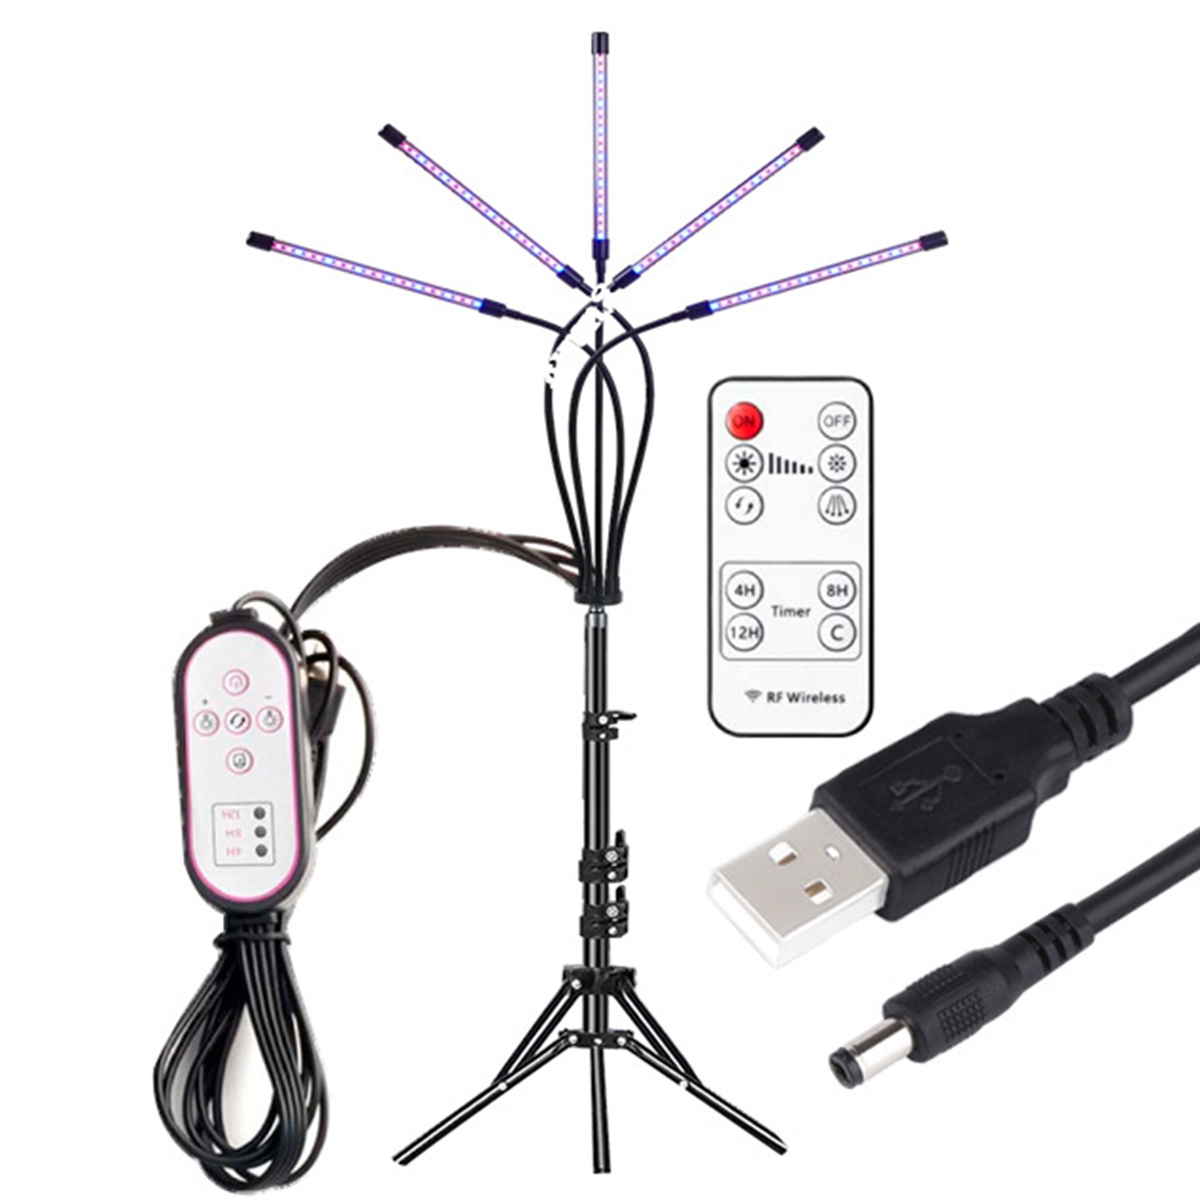 LED-Grow-Light-Remote-Control-Plant-Growing-Lamp-Lights-with-Tripod-for-Indoor-Plants-1836994-2